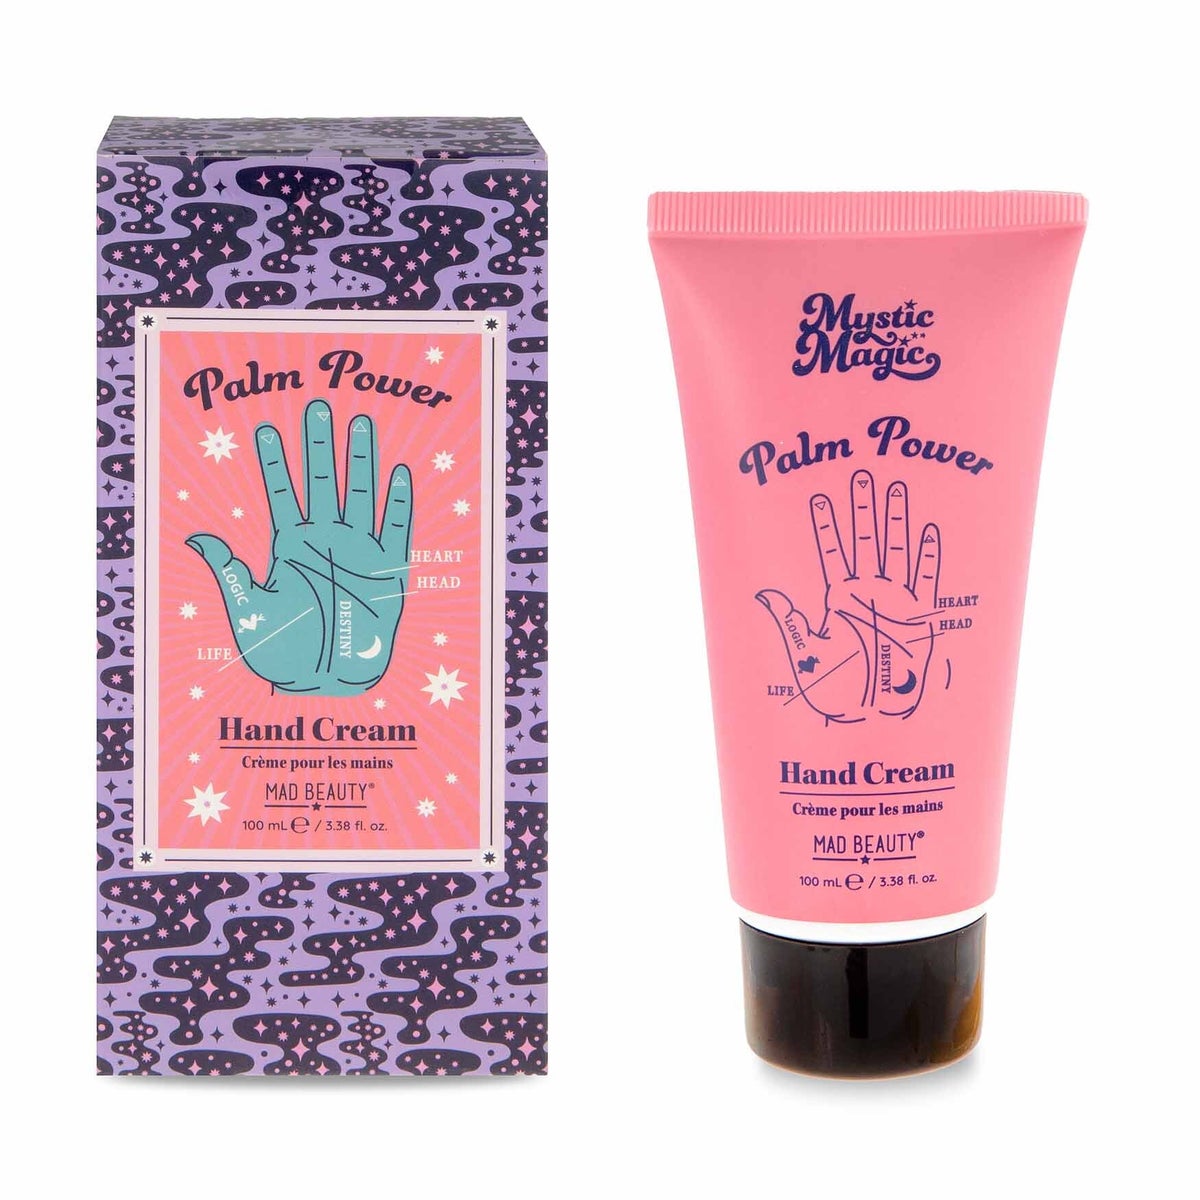 Mystic Magic - Hand Cream Palm Power - Indigo and Violet, enriched with Shea Butter